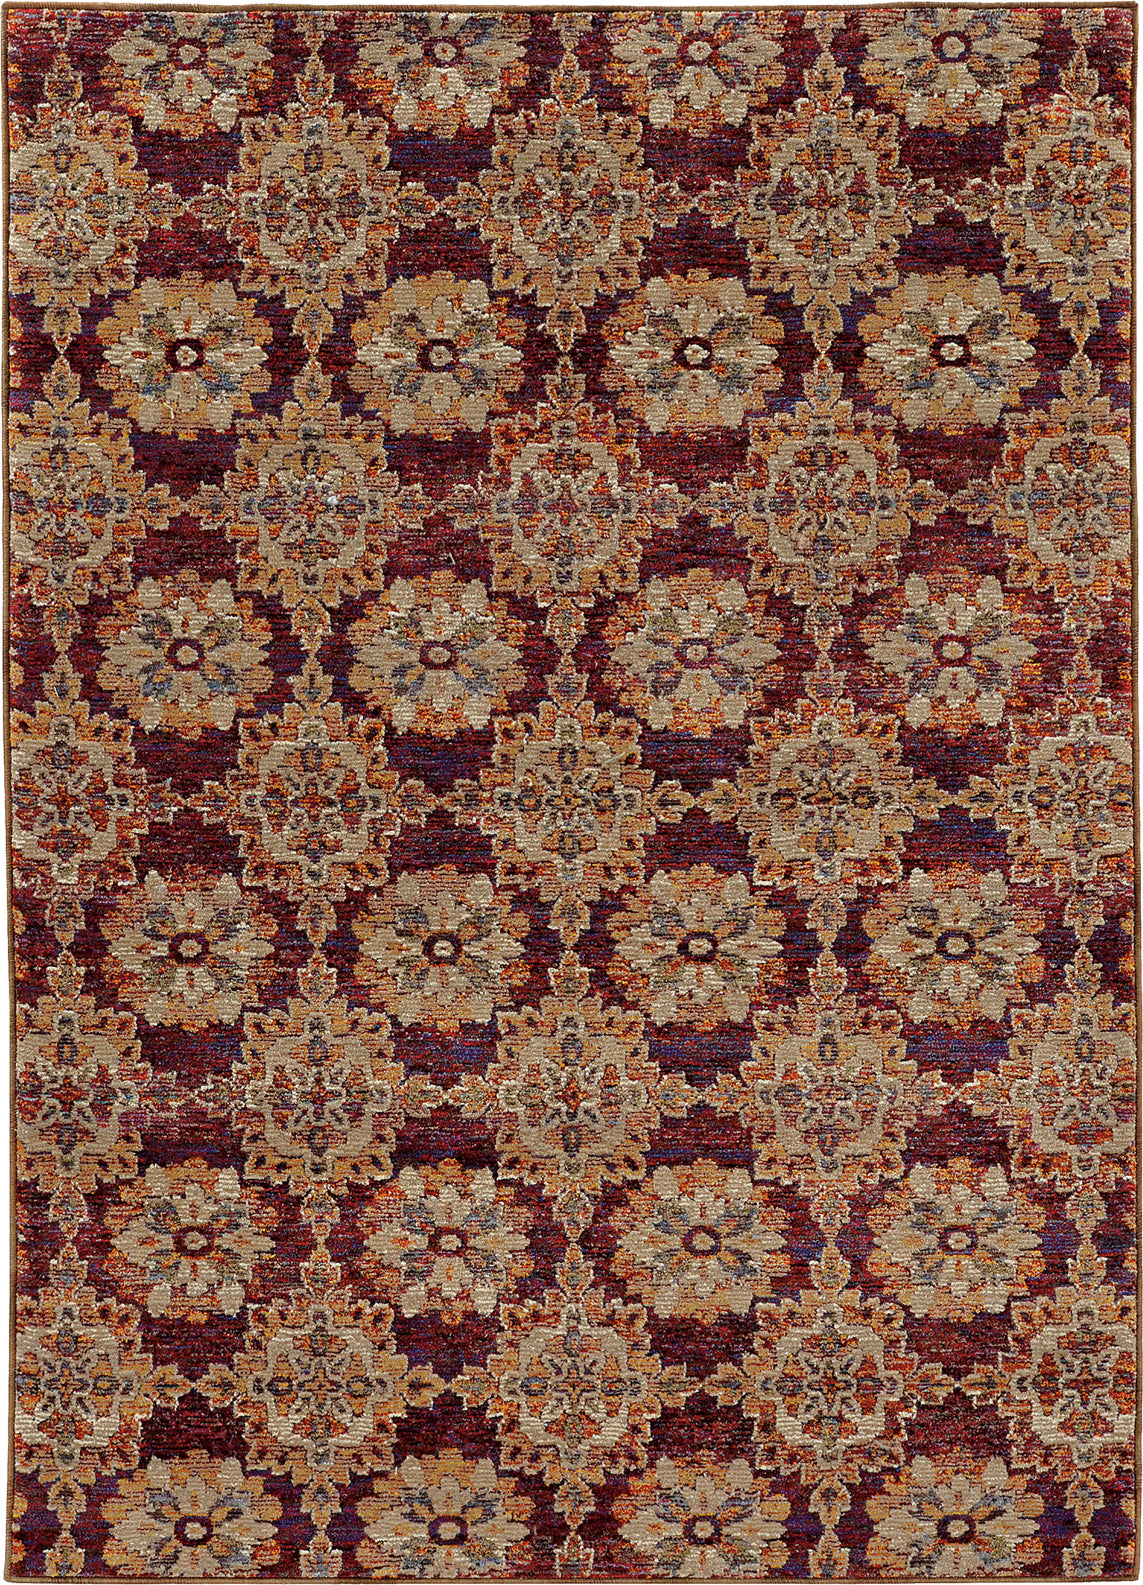 Oriental Weavers Andorra 6883A Red/ Gold Area Rug main image Featured